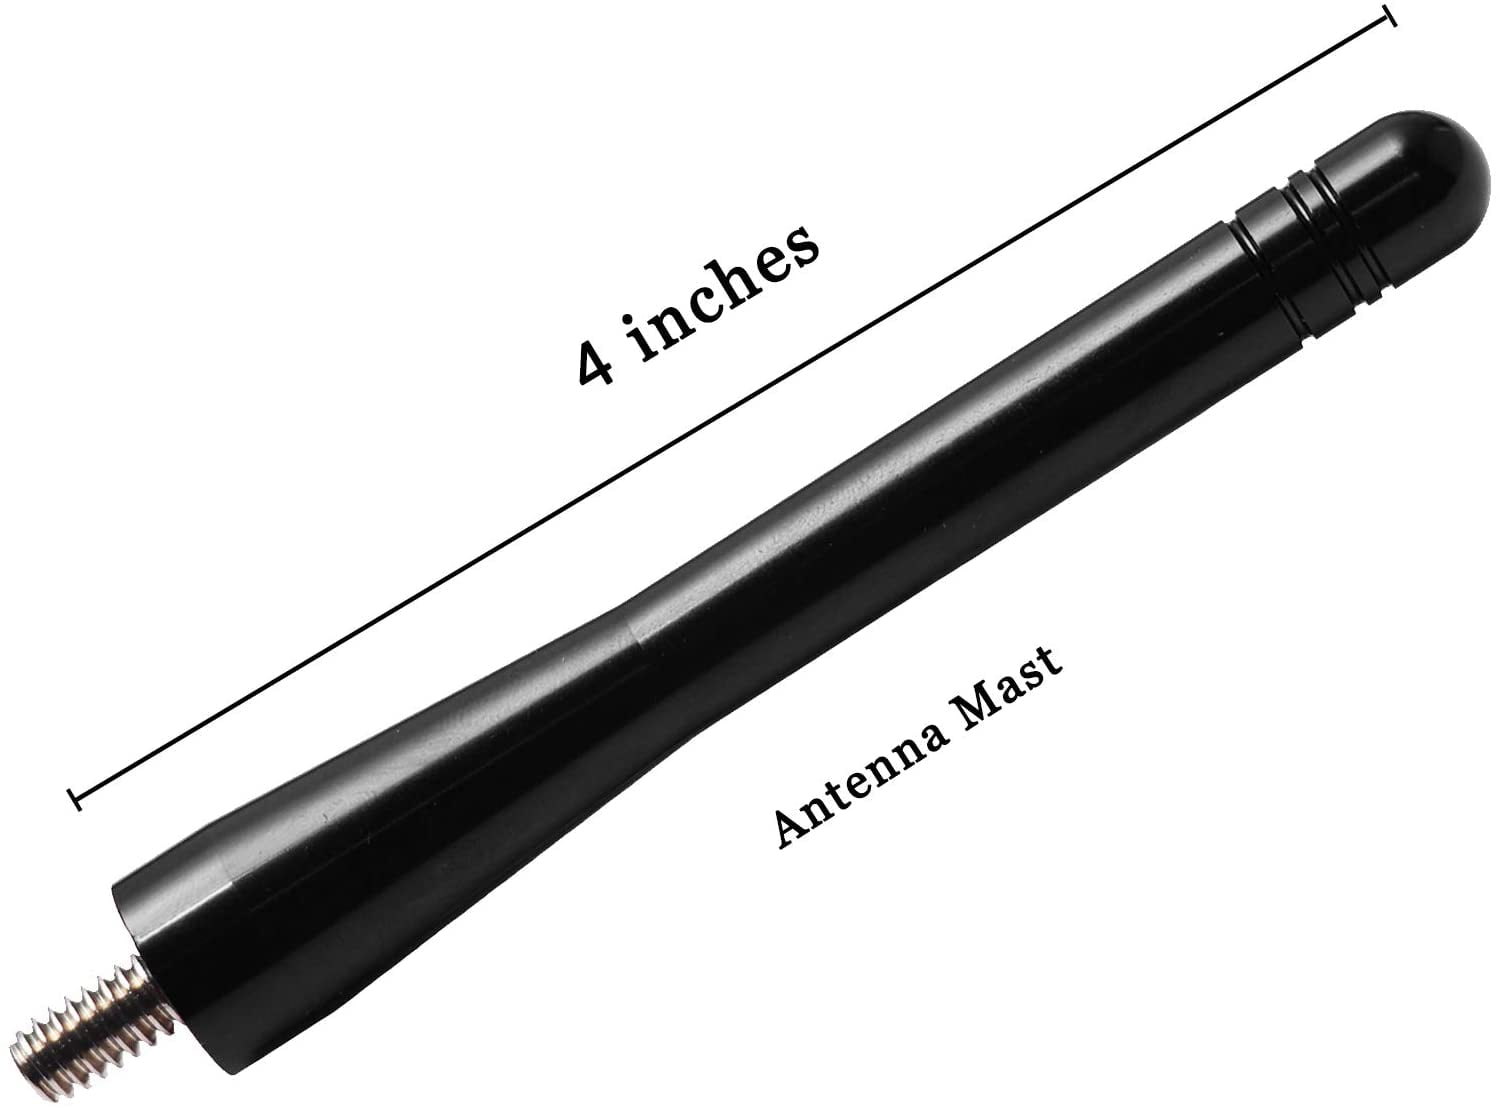 JAPower Replacement Antenna Compatible with MINI Cooper 2001-2018 6.78 inches-Black 